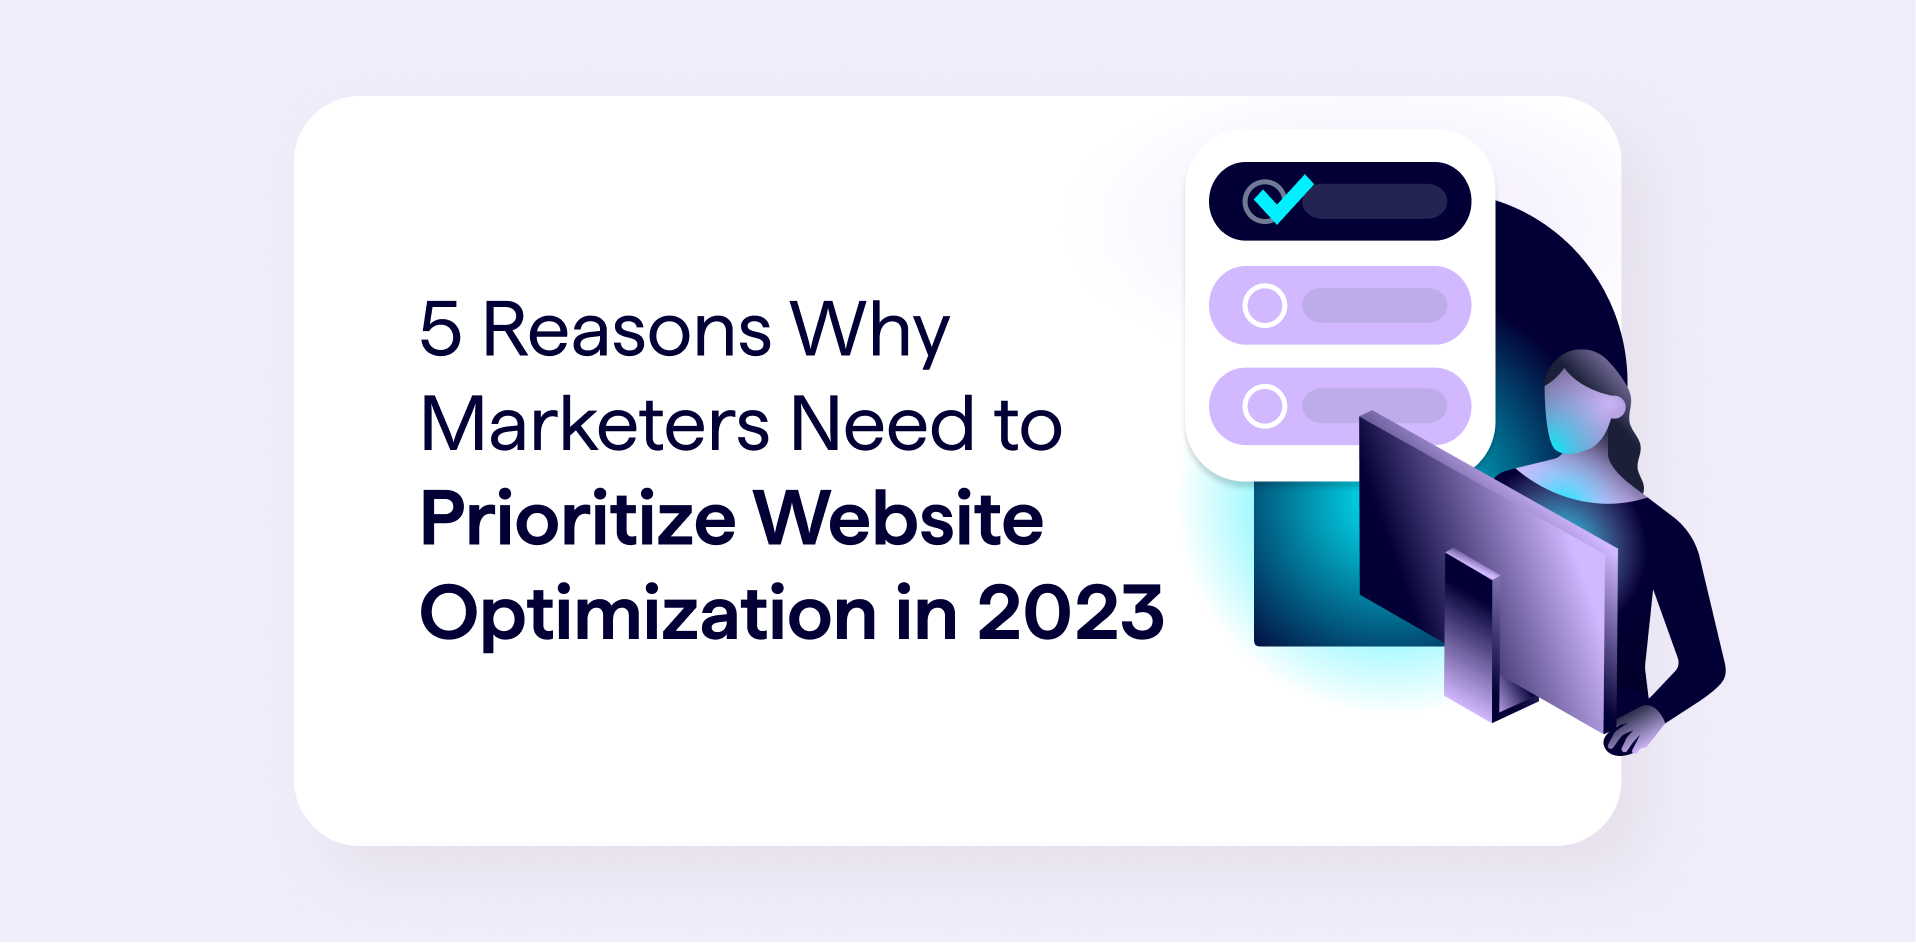 Article - 5 reasons why marketers need to prioritize SEO and website optimization in 2023